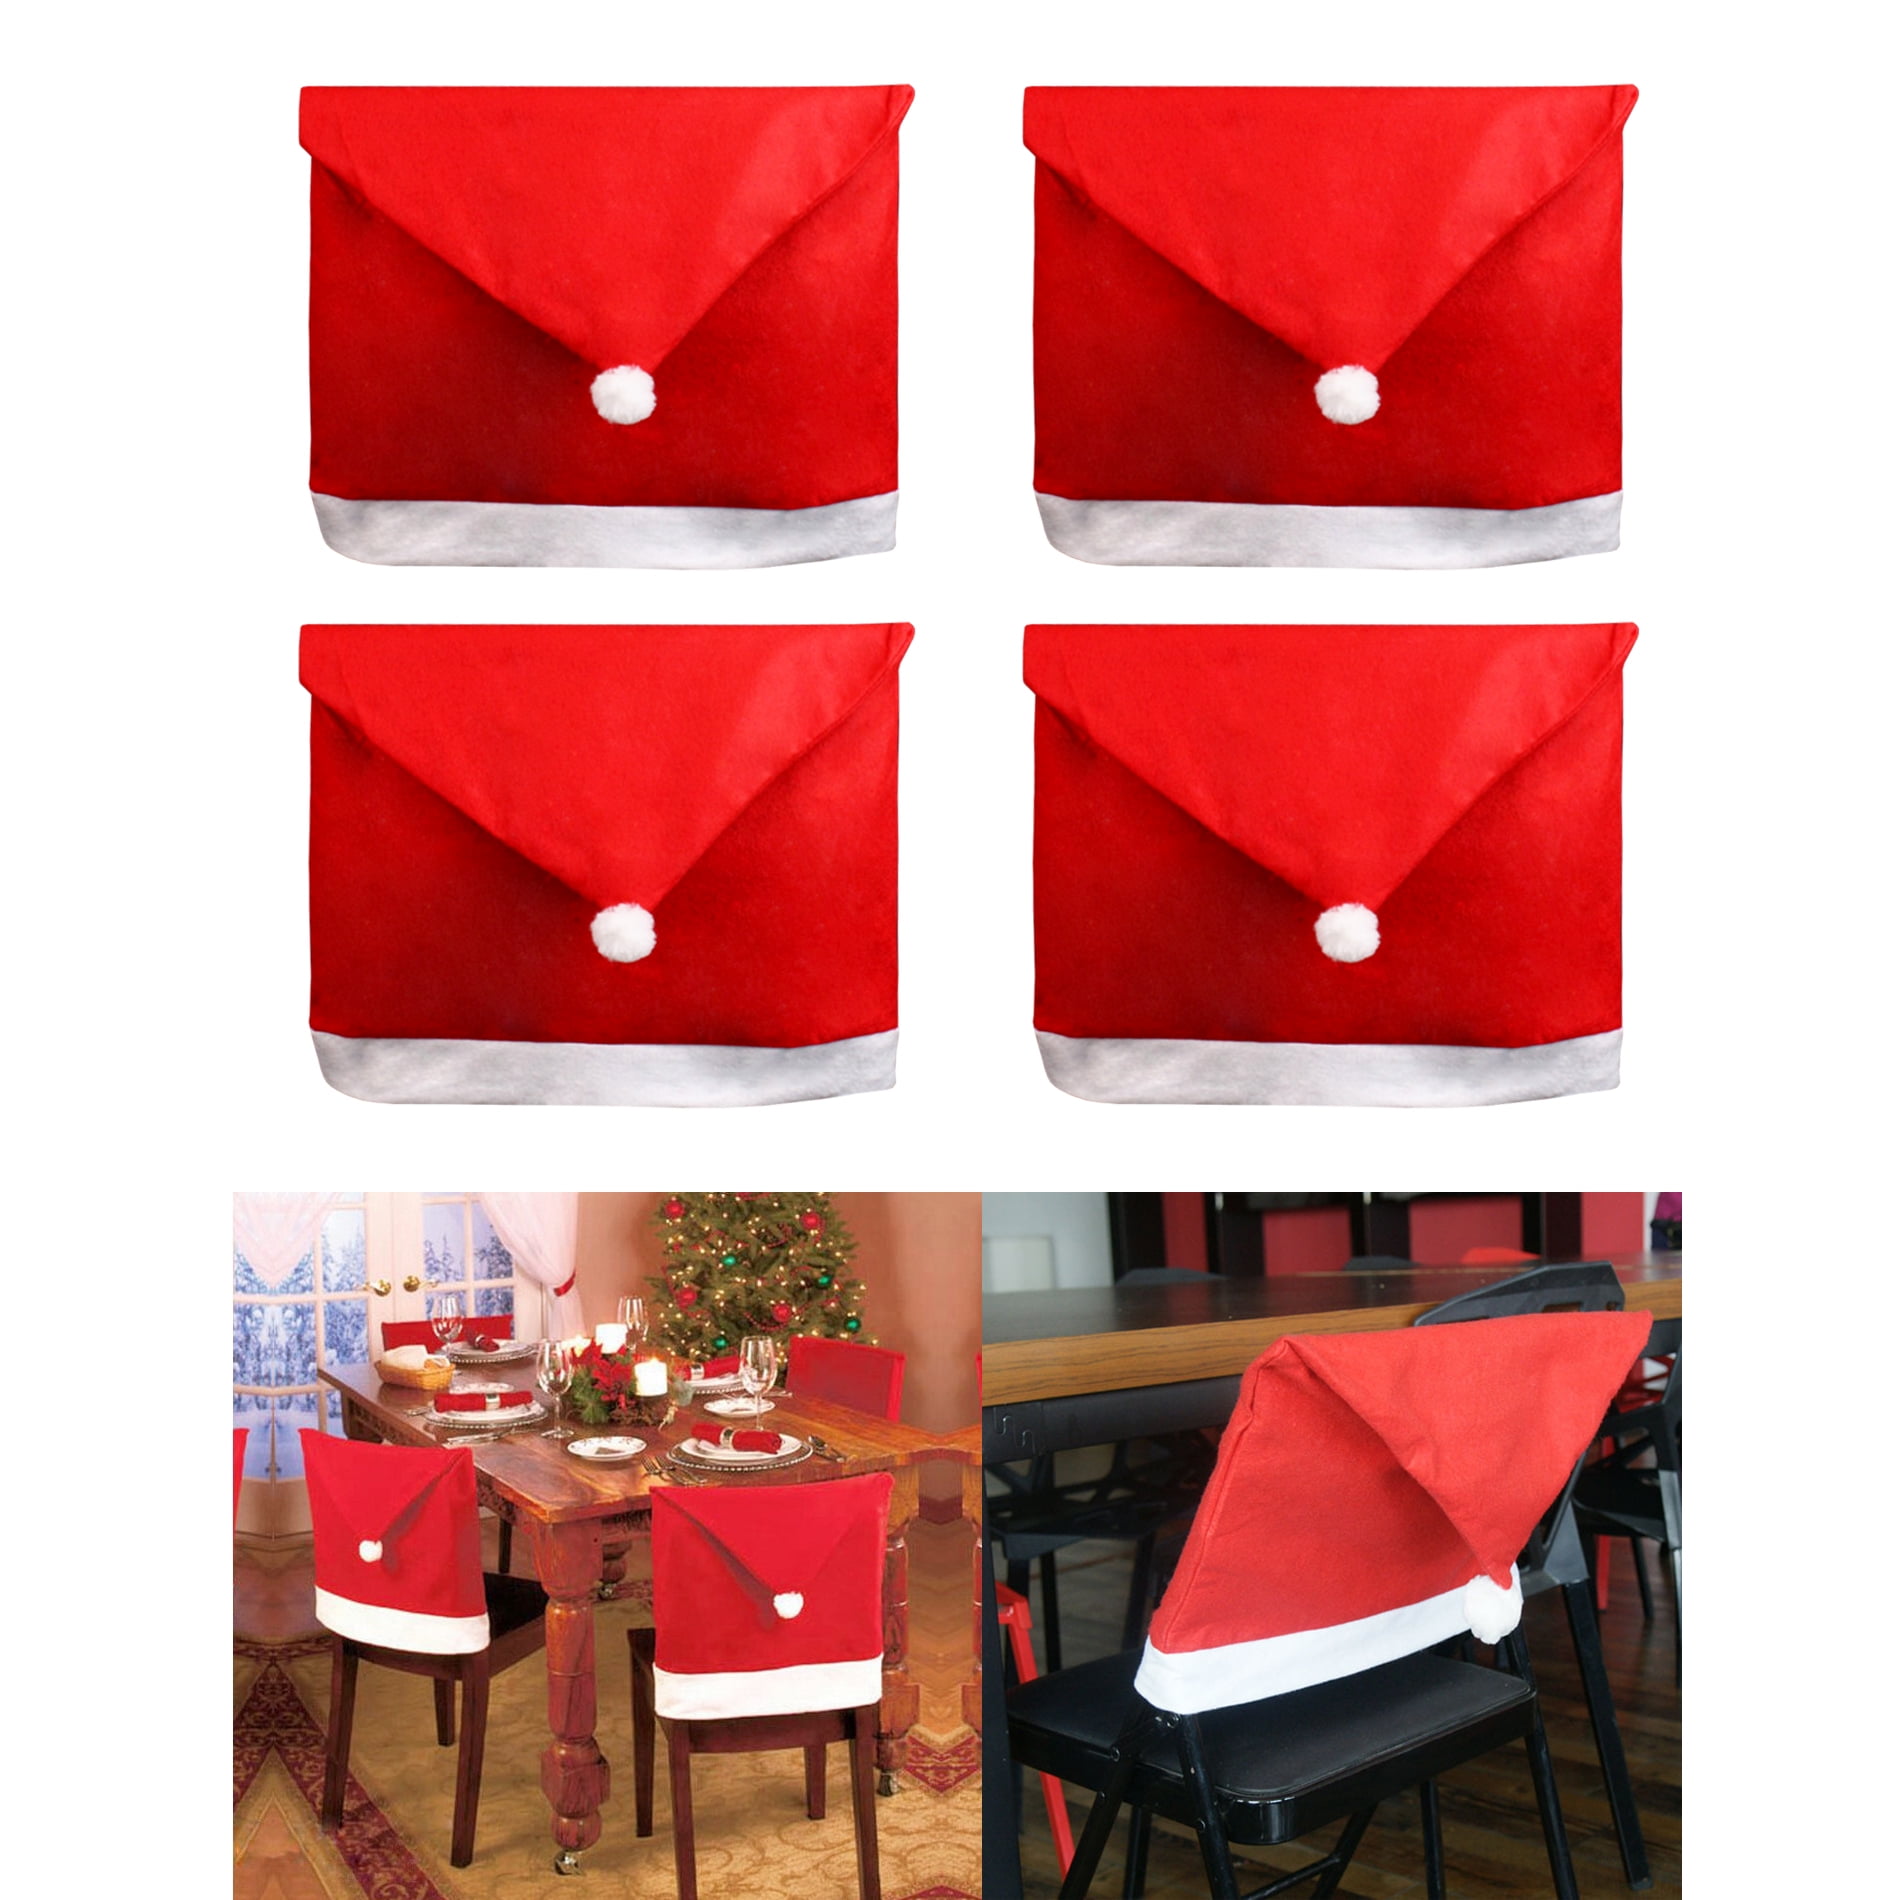 6 PACK Christmas Chair Covers,Xams Chair Covers Caps,Santa Claus Hat Chair Back Covers,Slipcovers Set For Christmas Festive Decoration/Home Dinner Christmas Table Decoration/Kitchen Party Decor-4PCS Halloween Fake Large Spider 